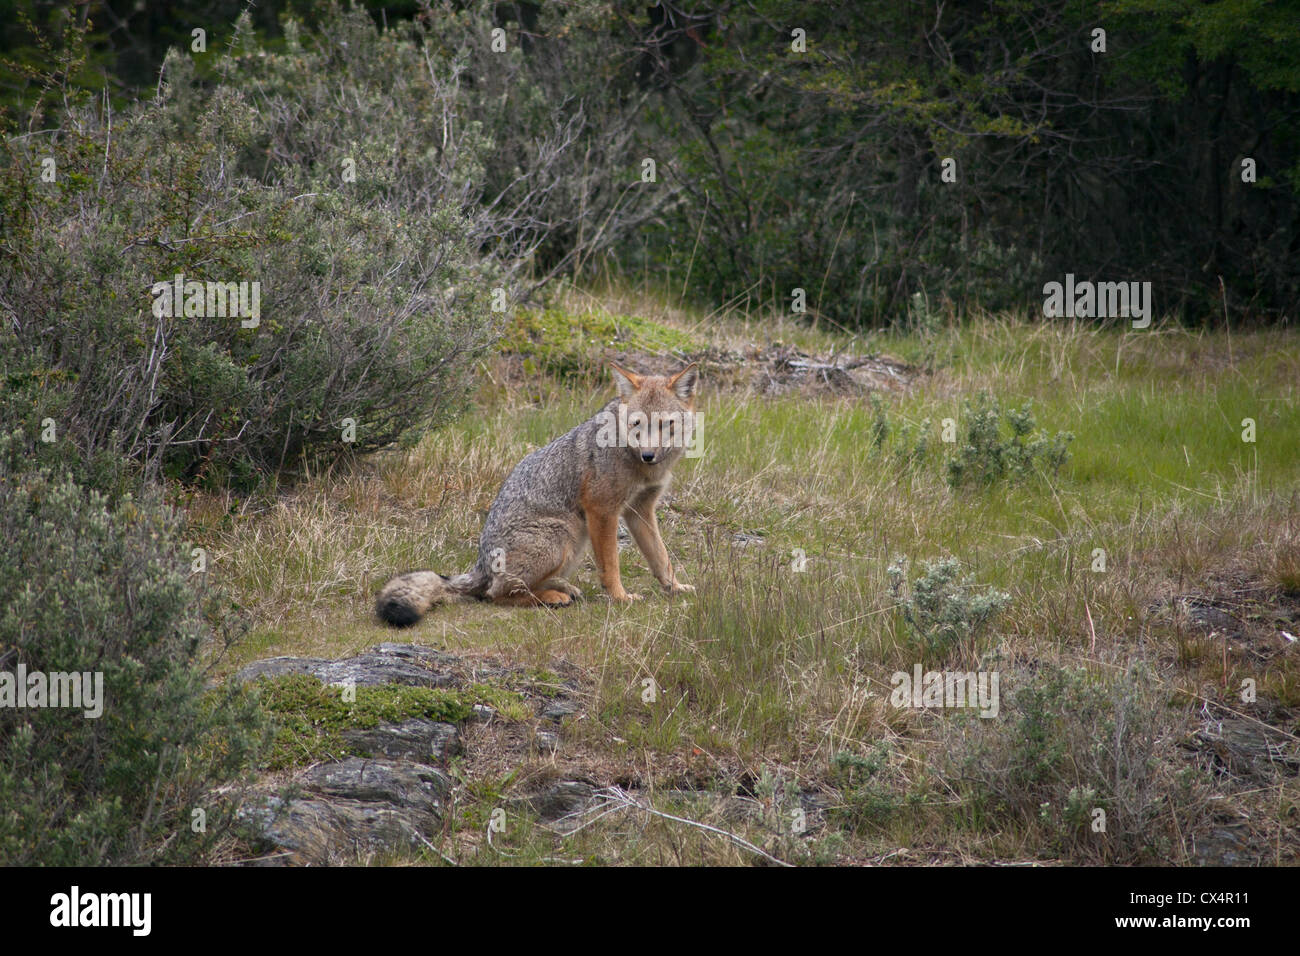 Culpeo Fox in the Patagonia region of Argentina Stock Photo